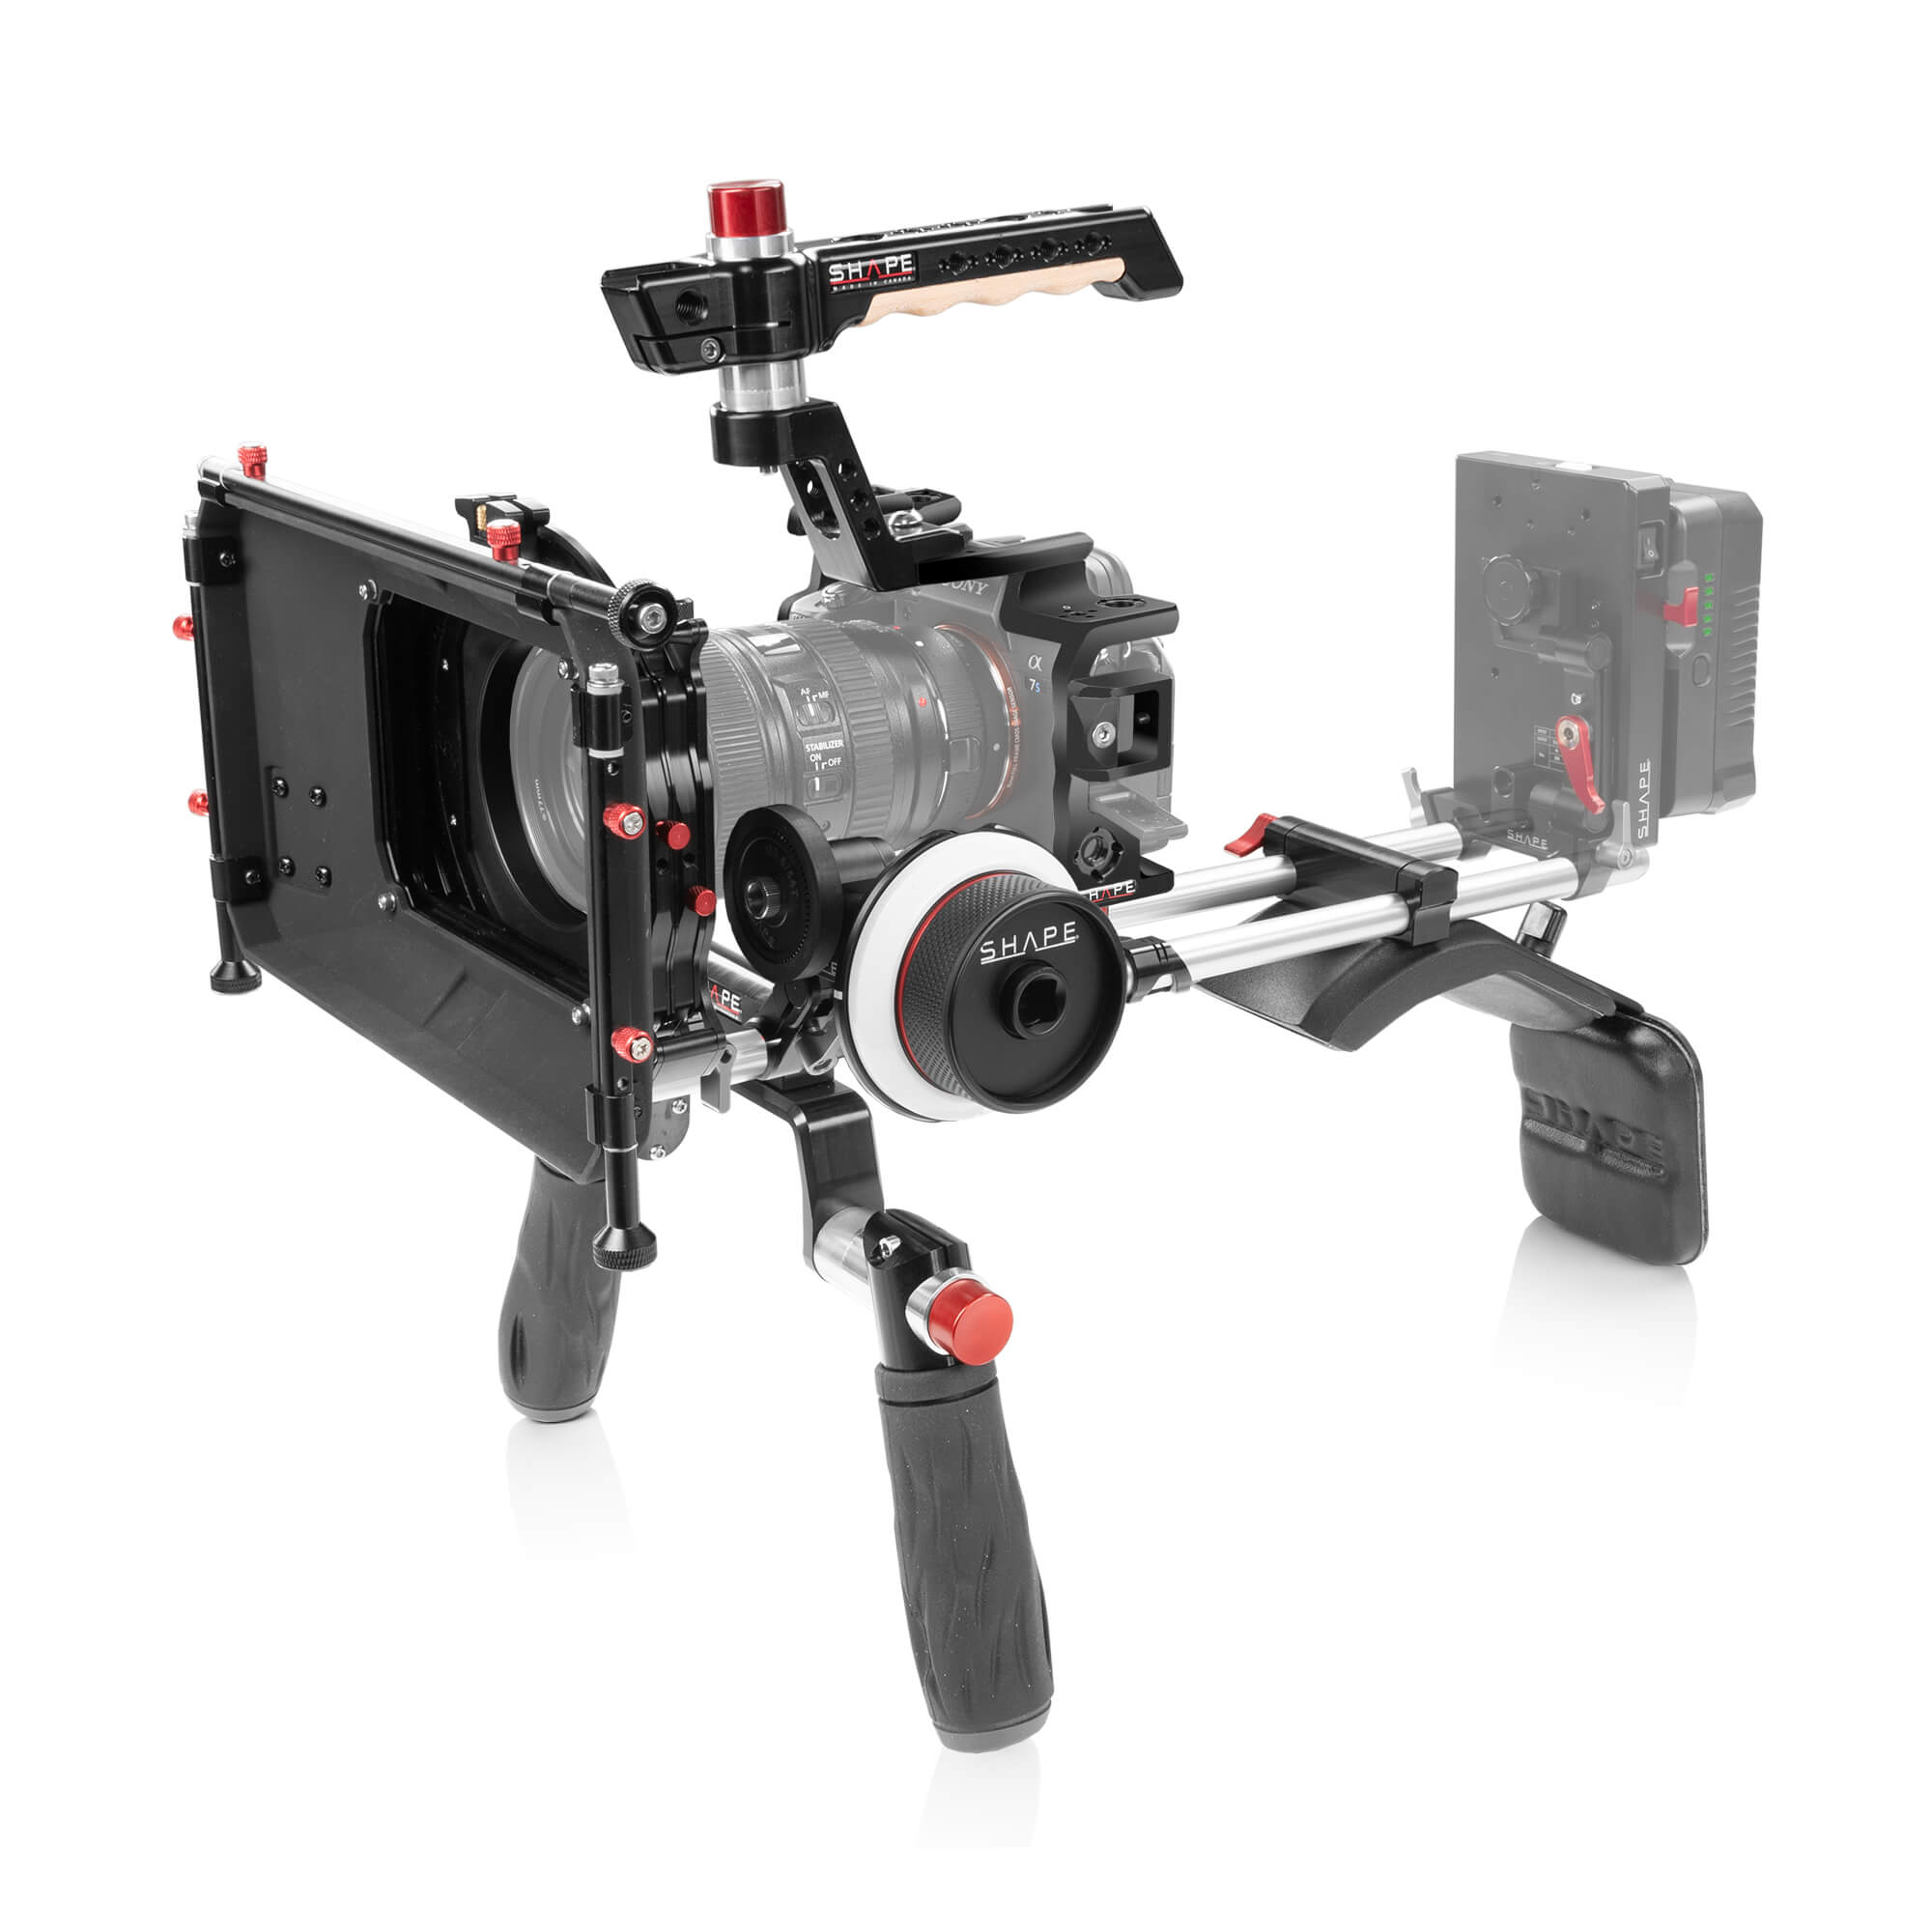 SHAPE Camera Cage with Top Handle and 15mm Baseplate for Sony a7S III